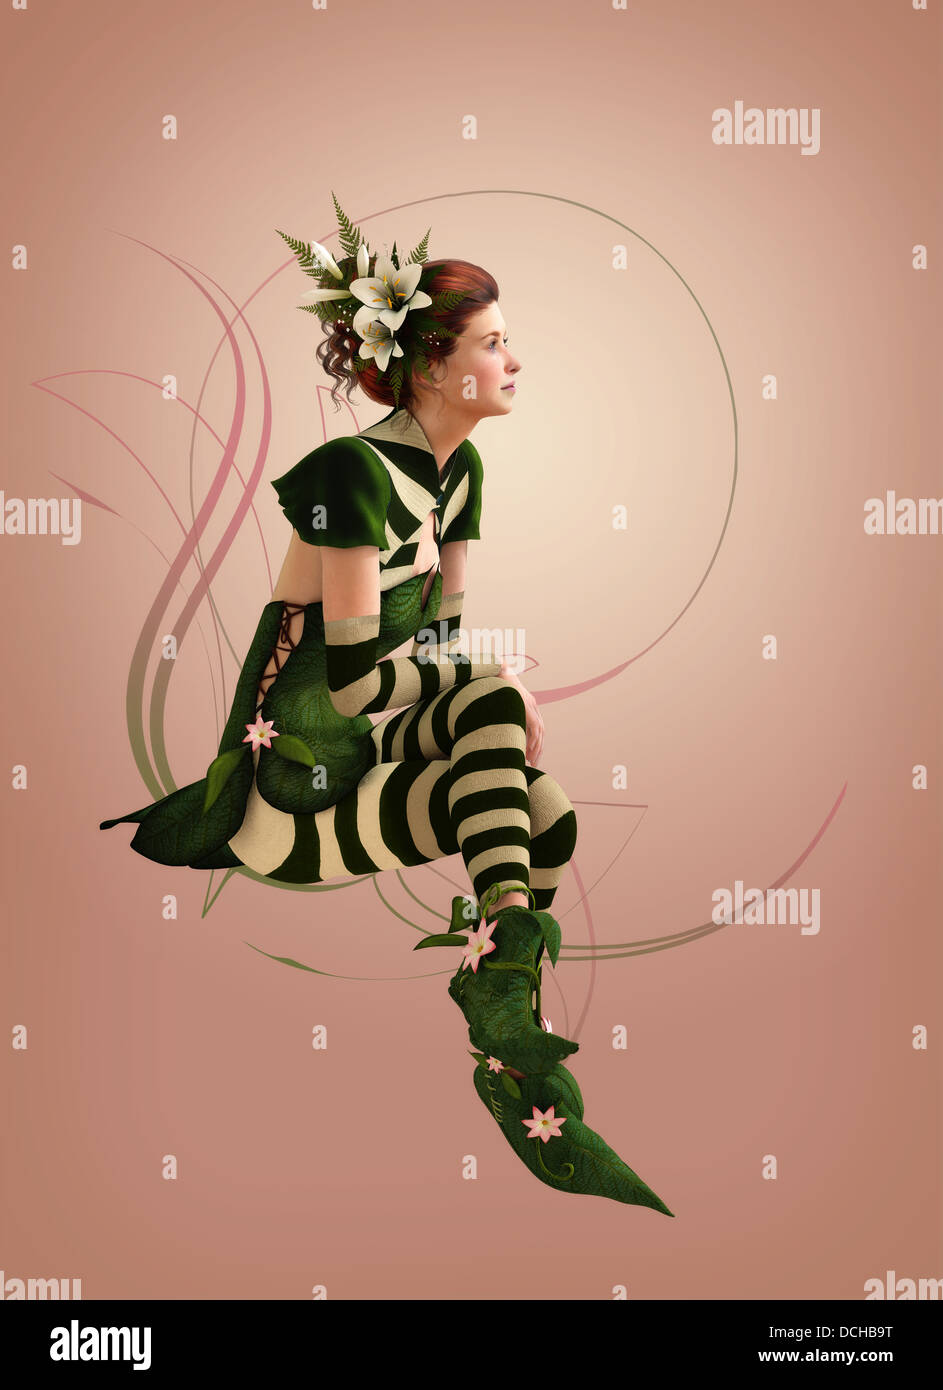 3d computer graphics of a girl with a striped dress and flowers in her hair Stock Photo